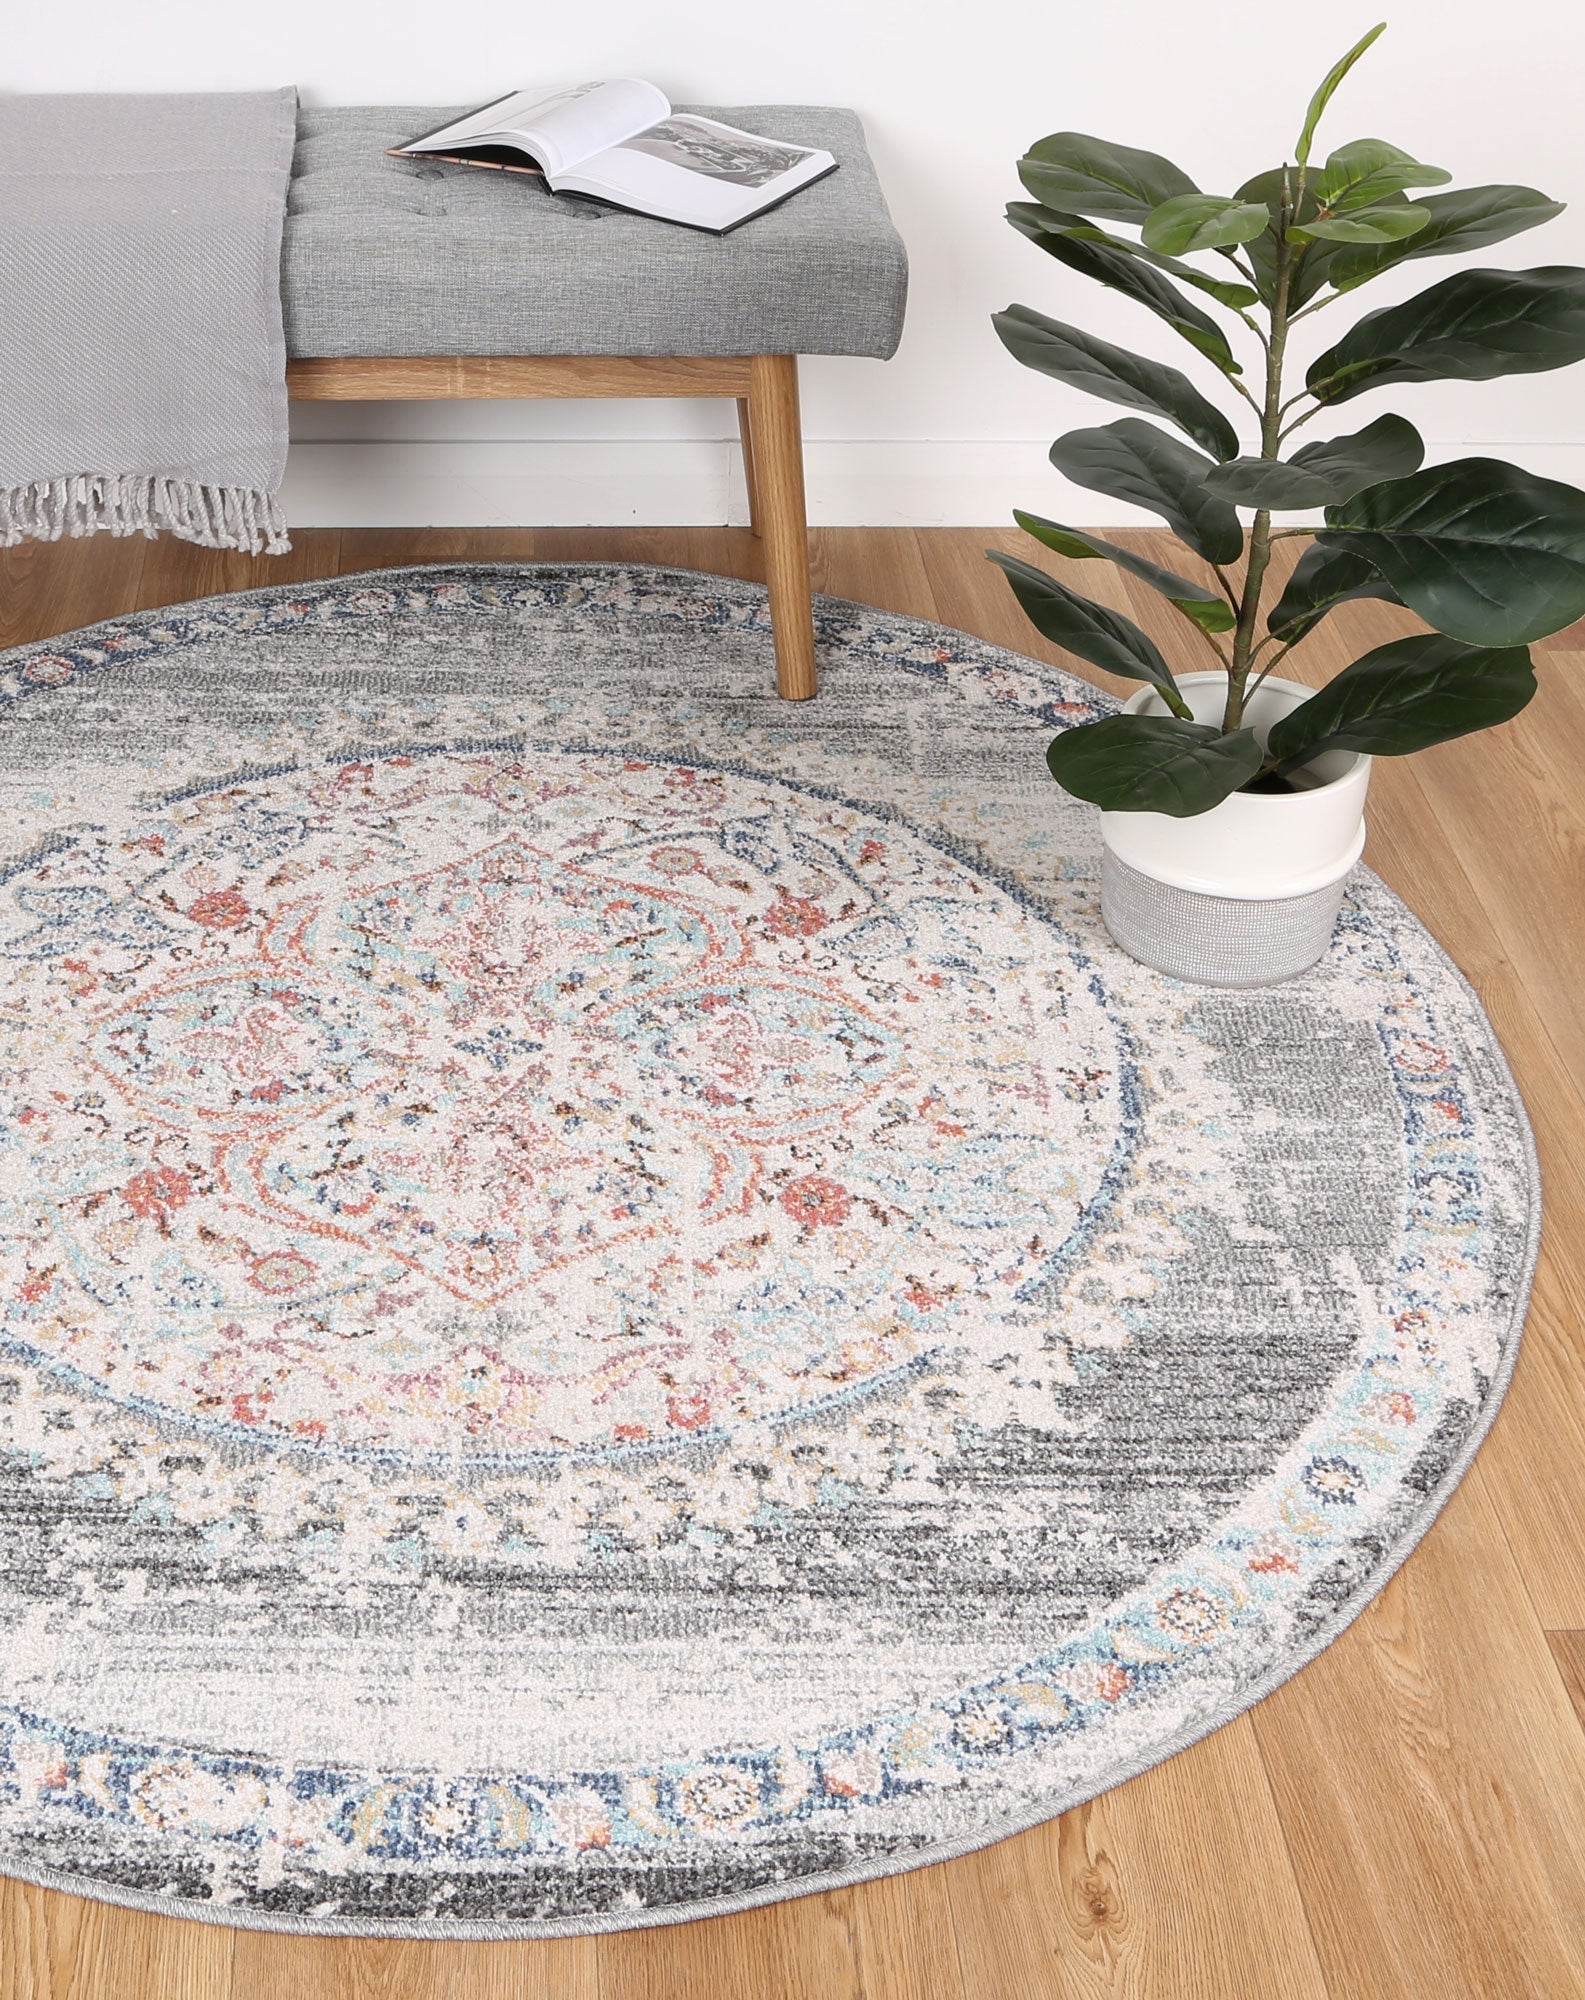 Mercury Hollow Medalion Transitional Grey Round Rug - Round Rug - Rugs a Million